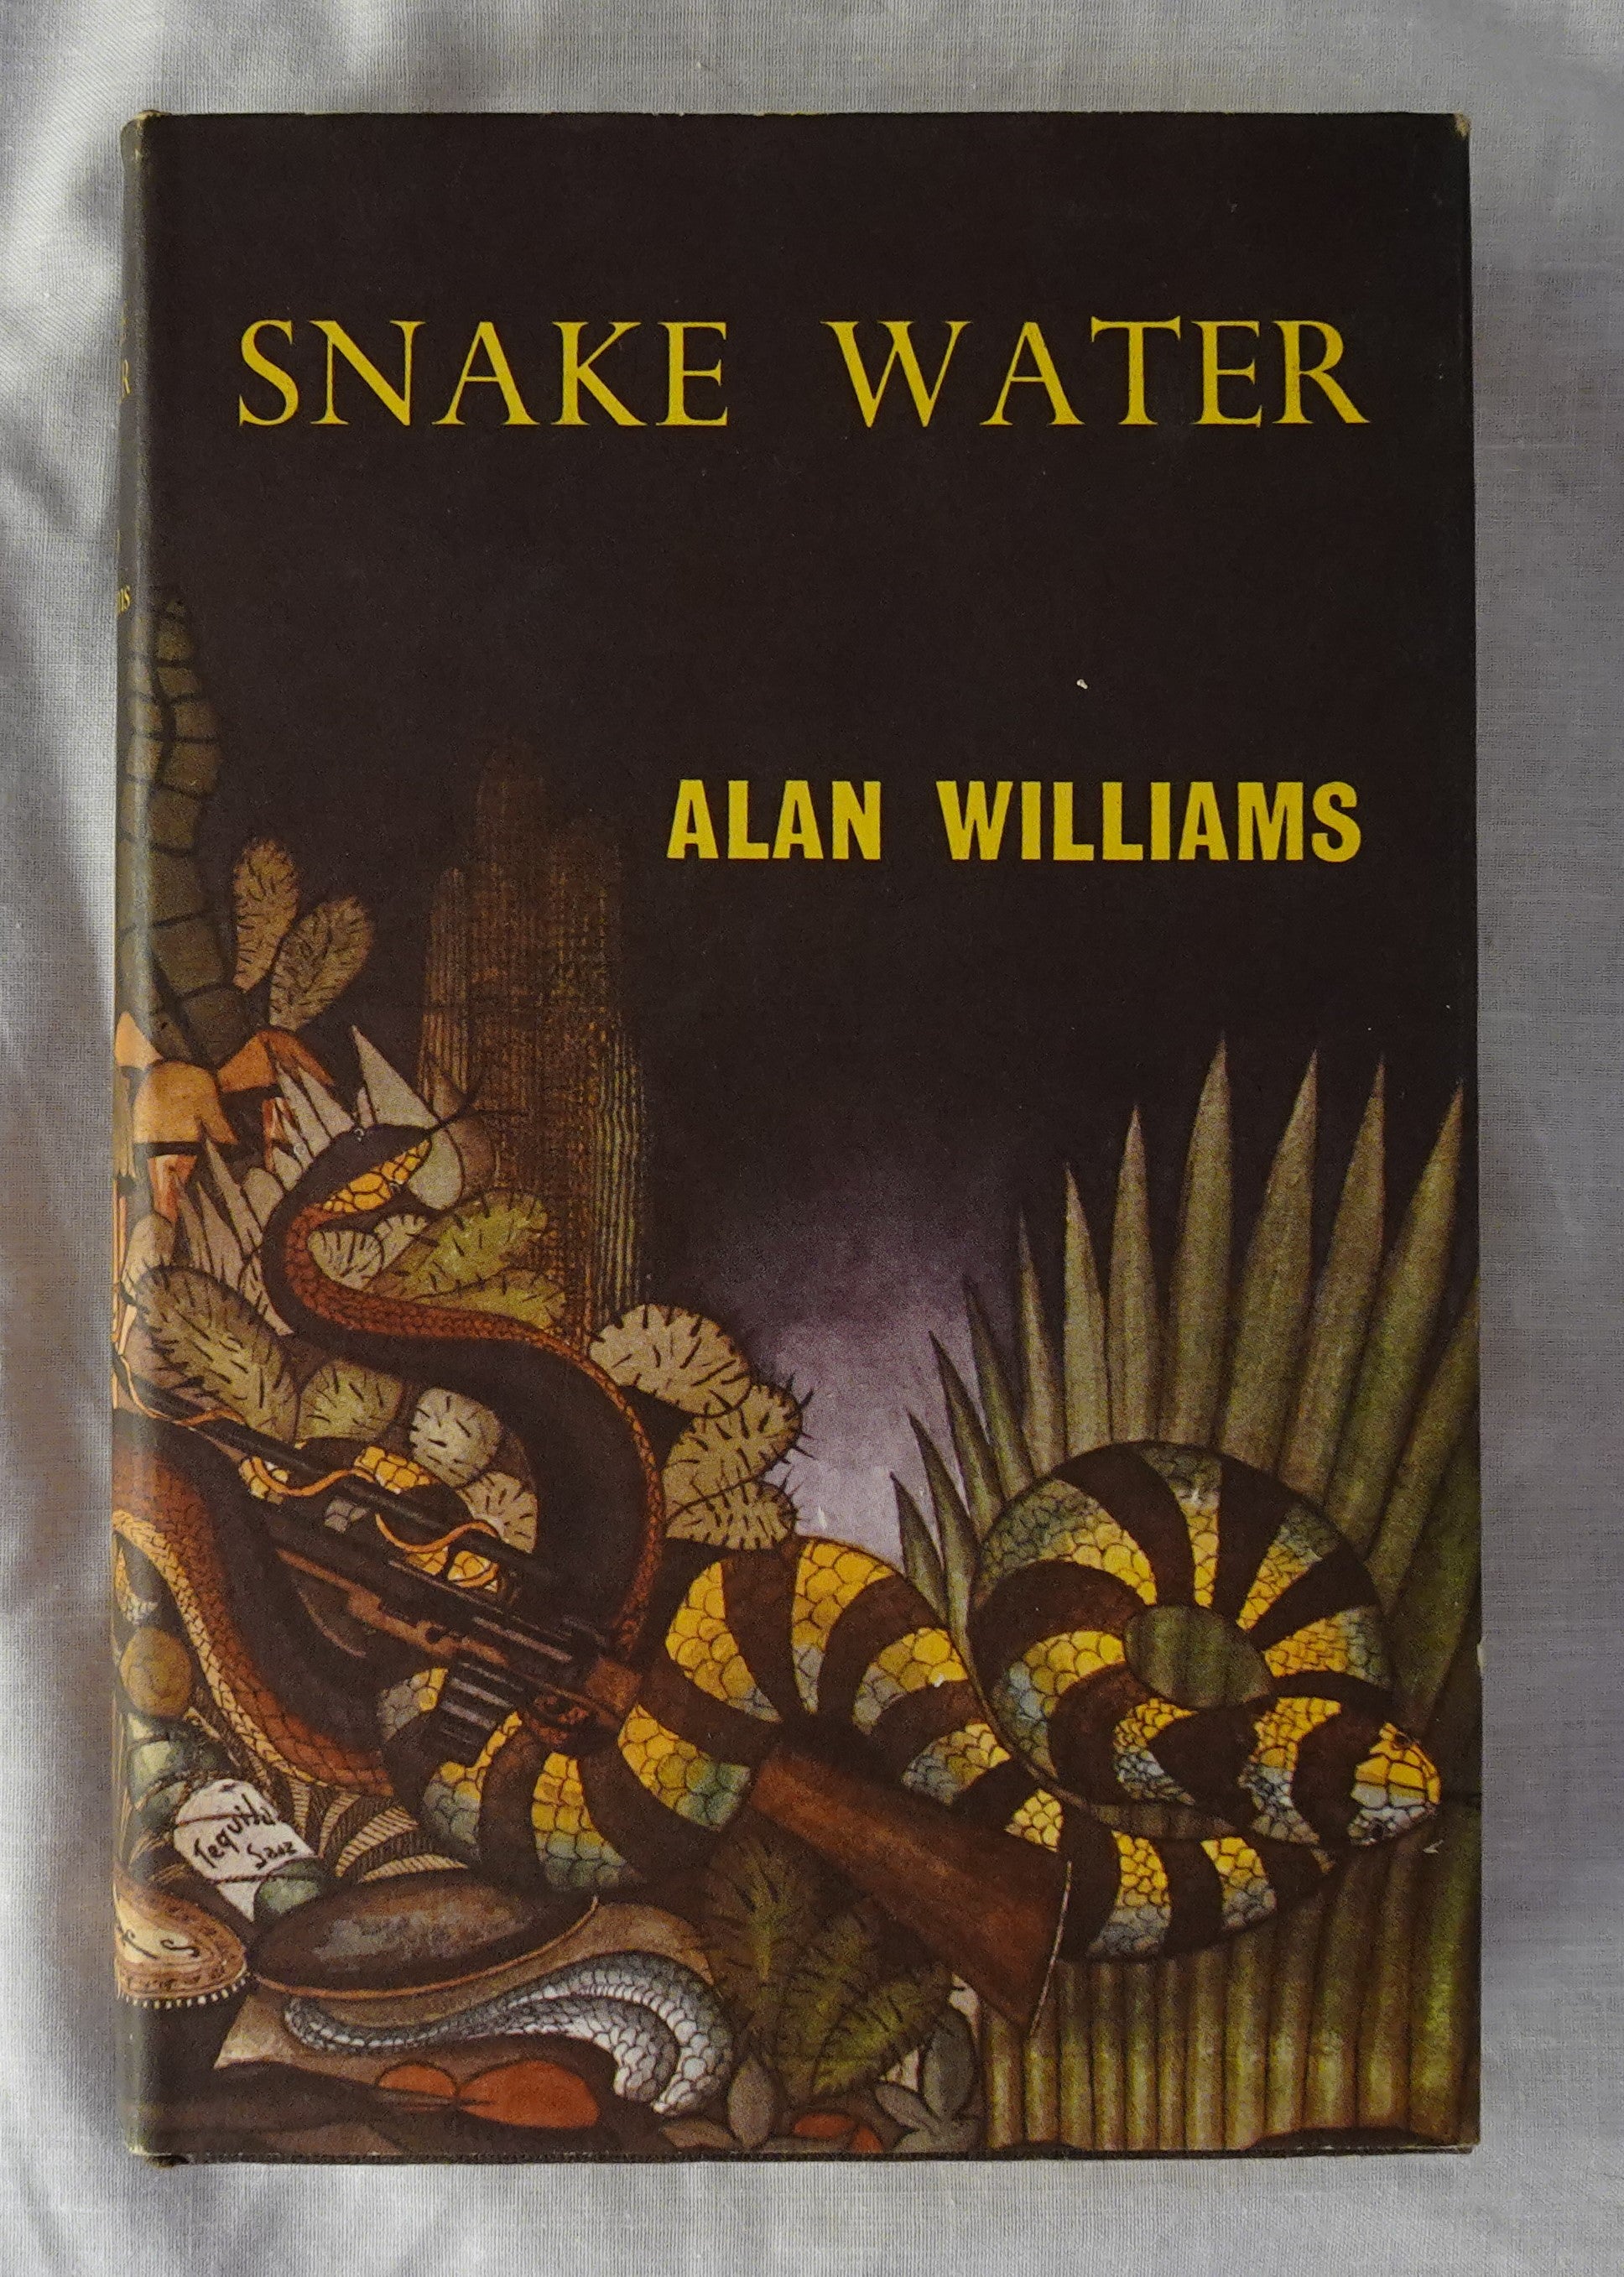 Snake Water by Alan Williams